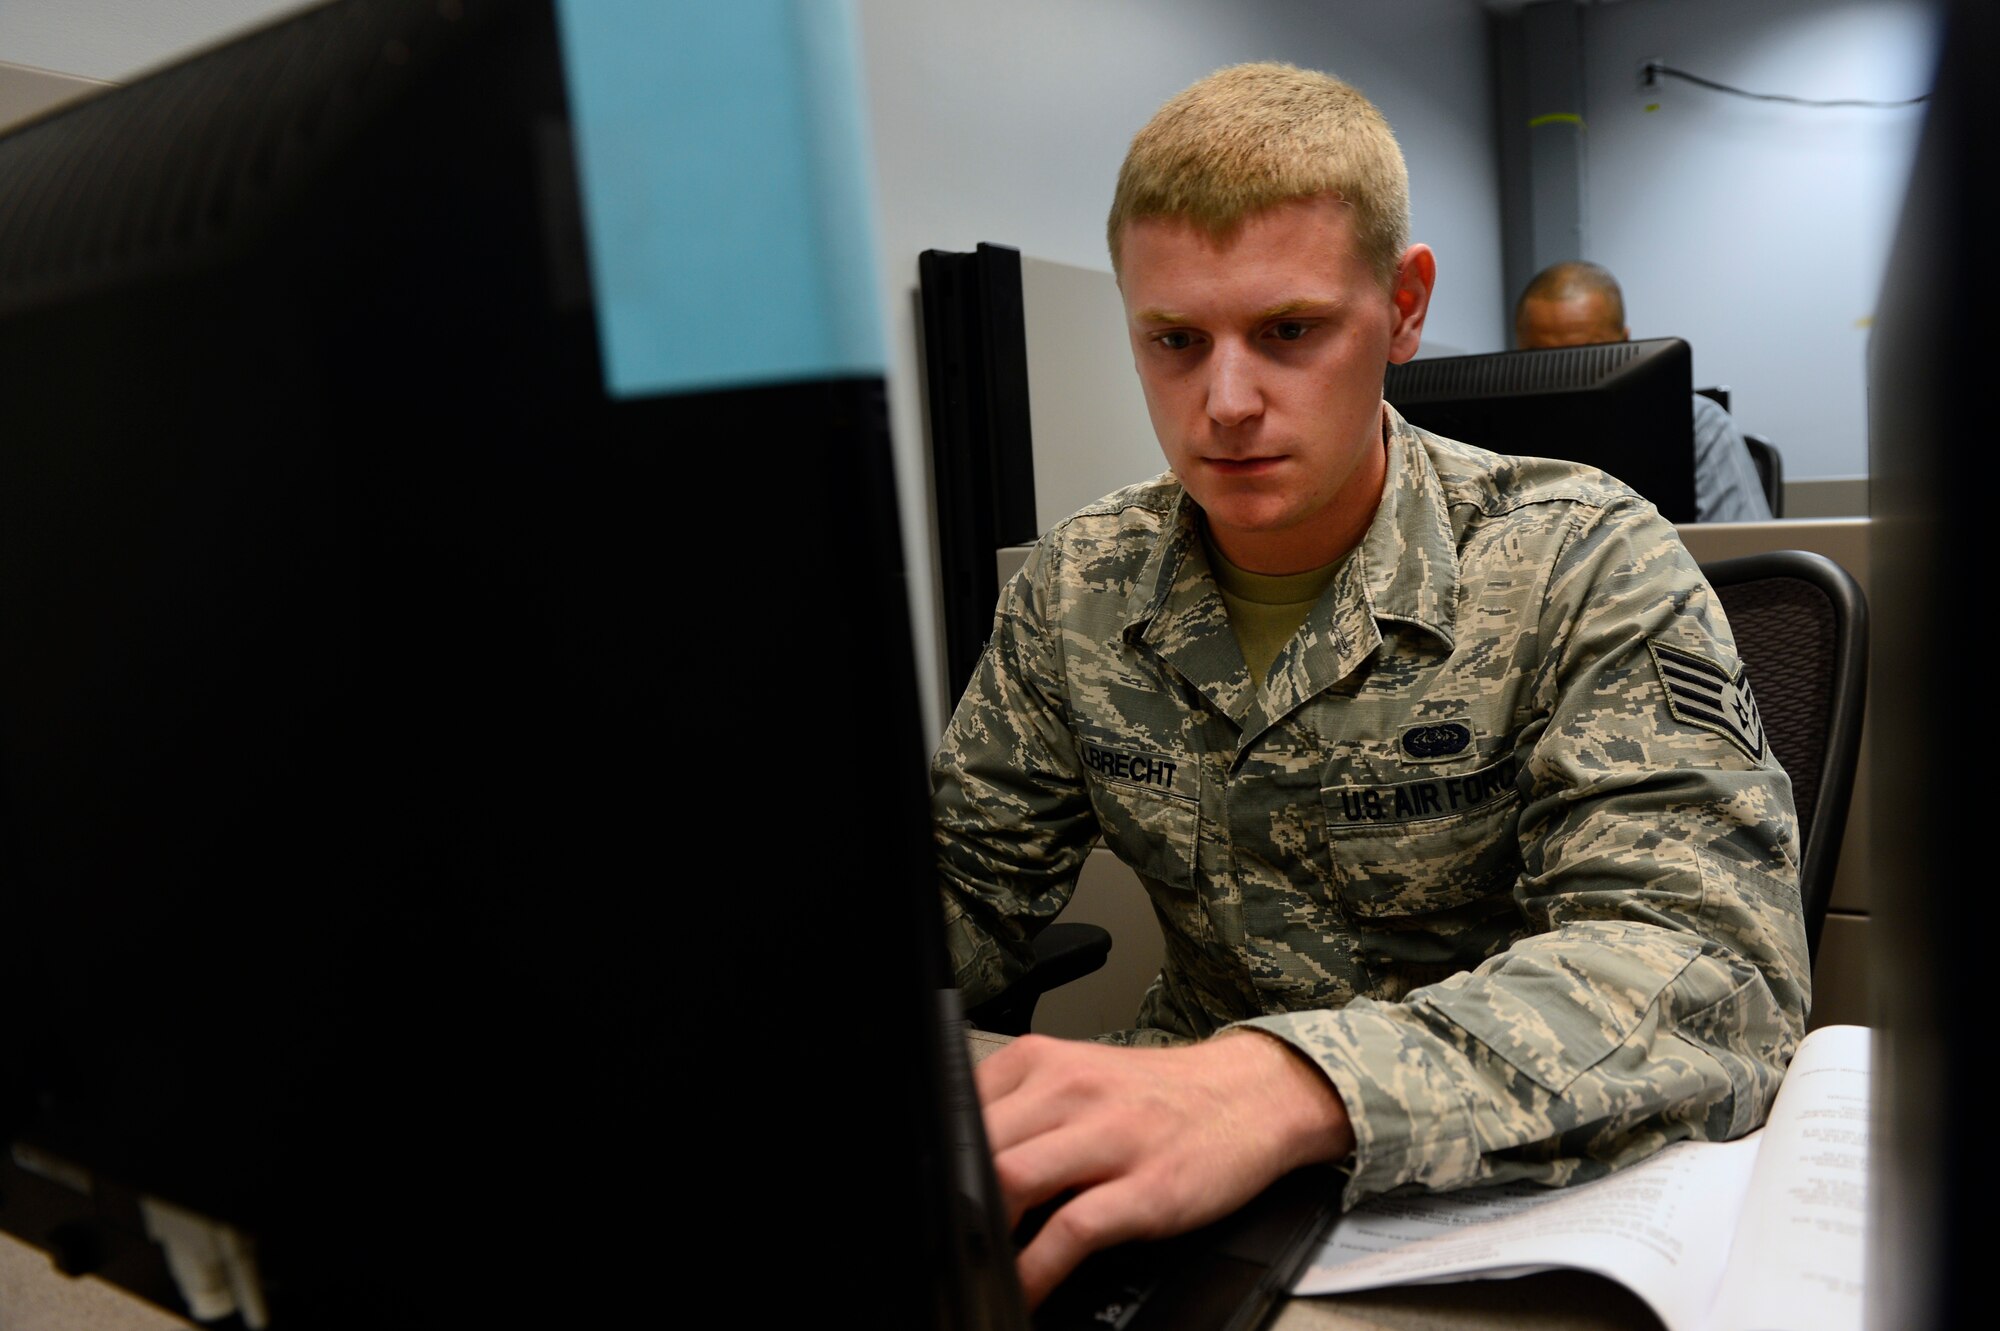 Staff Sgt. Alek Albrecht participates in a Network War Bridge Course at the 39th Information Operations Squadron Sept. 19, 2014, Hurlburt Field, Fla. Albrecht is practicing to hack into a simulated network to better understand what techniques real hackers may use when attempting to infiltrate Air Force networks. Air Force Space Command provides trained and ready cyber forces to the warfighter through 24th Air Force. Albrecht is a Air Force Network Operations and Security Center enterprise network technician. (U.S. Air Force photo/Airman 1st Class Krystal Ardrey)